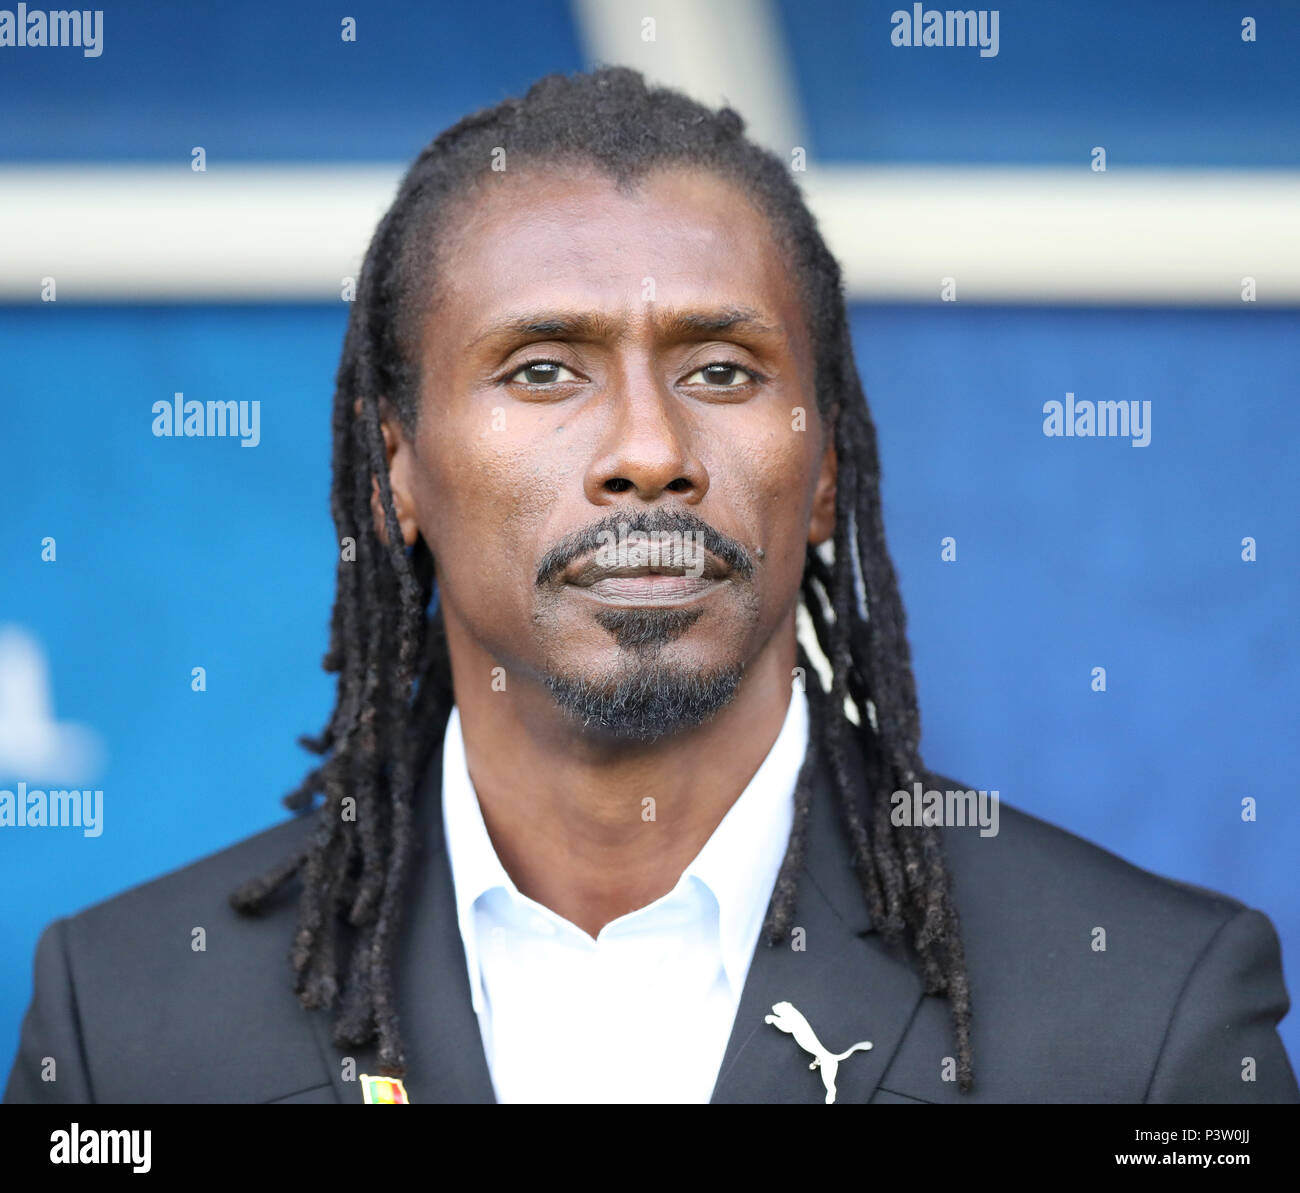 Moscow, Russia. 19th June, 2018. Senegal's head coach Aliou Cisse reacts prior to a Group H match between Poland and Senegal at the 2018 FIFA World Cup in Moscow, Russia, June 19, 2018. Credit: Xu Zijian/Xinhua/Alamy Live News Stock Photo